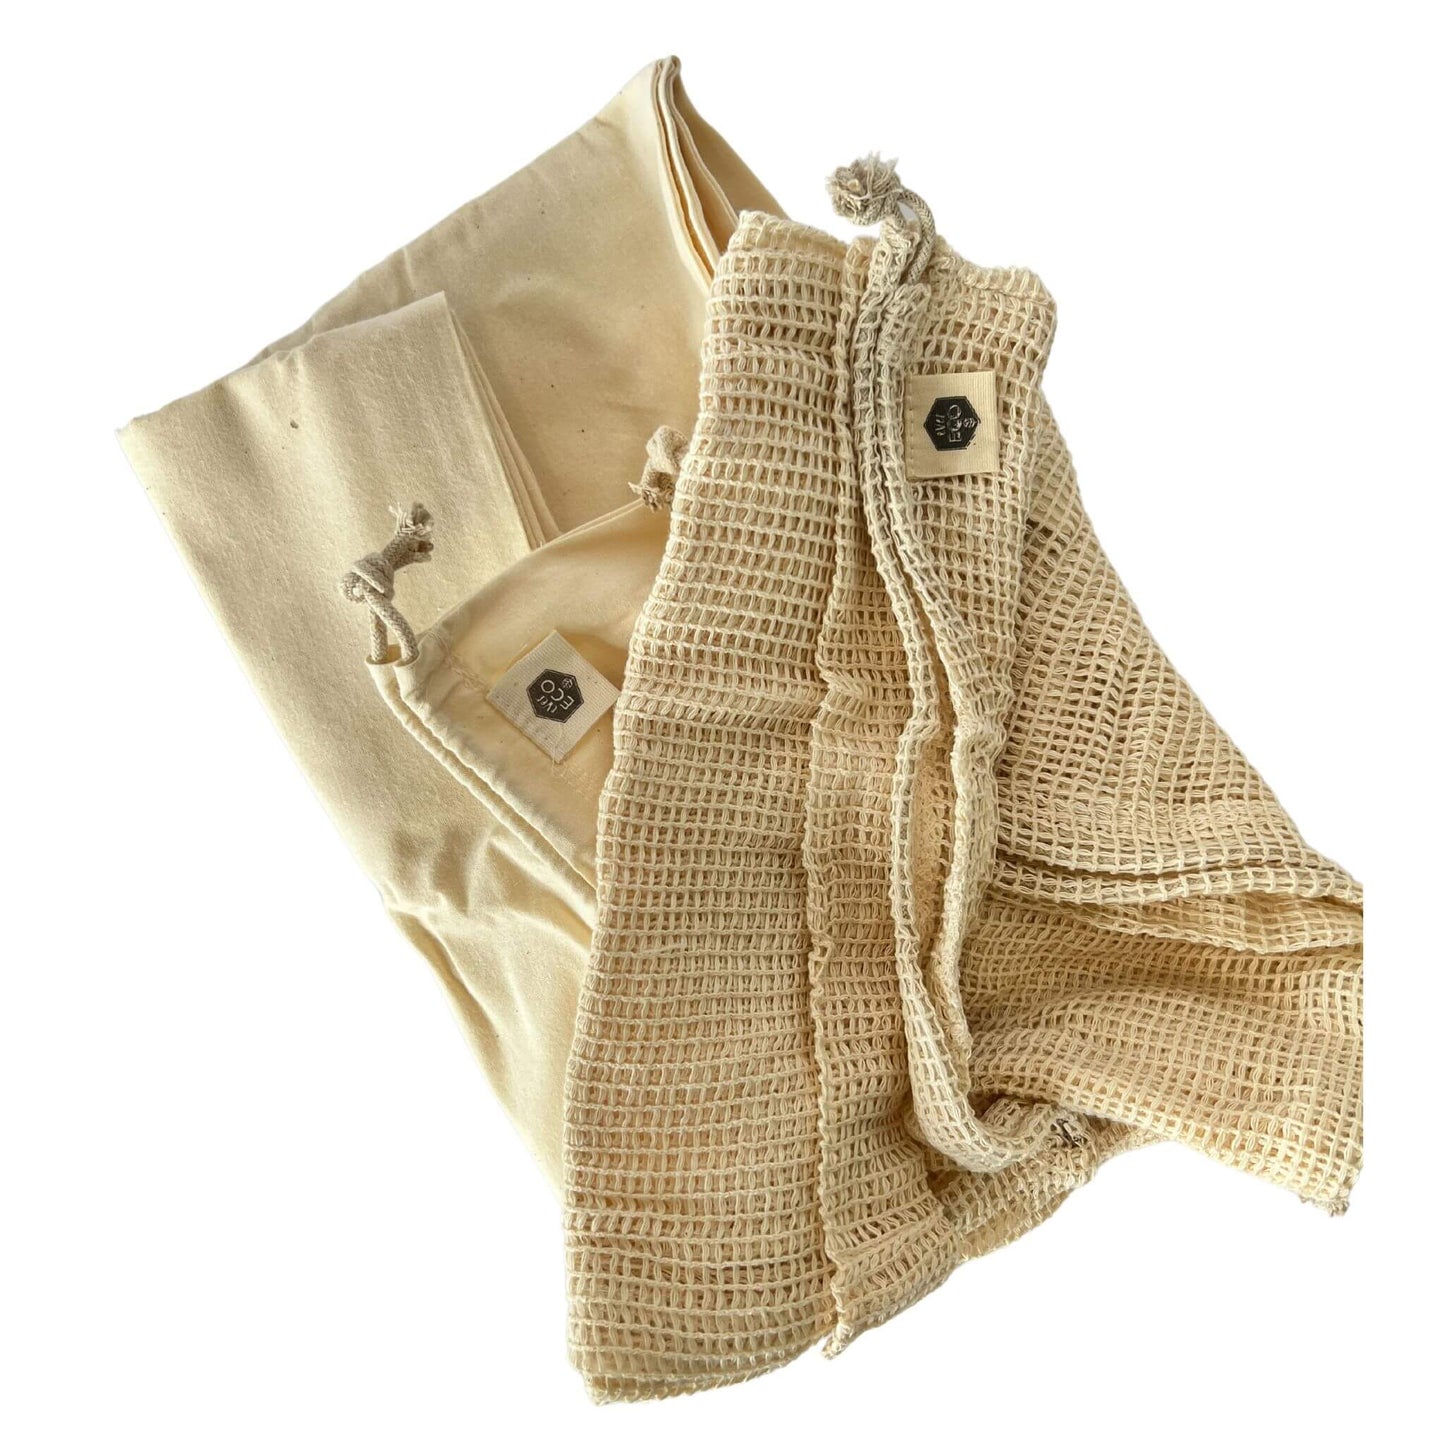 Ever Eco Organic Cotton Bag Mixed Set 2 muslin and 2 net produce bags